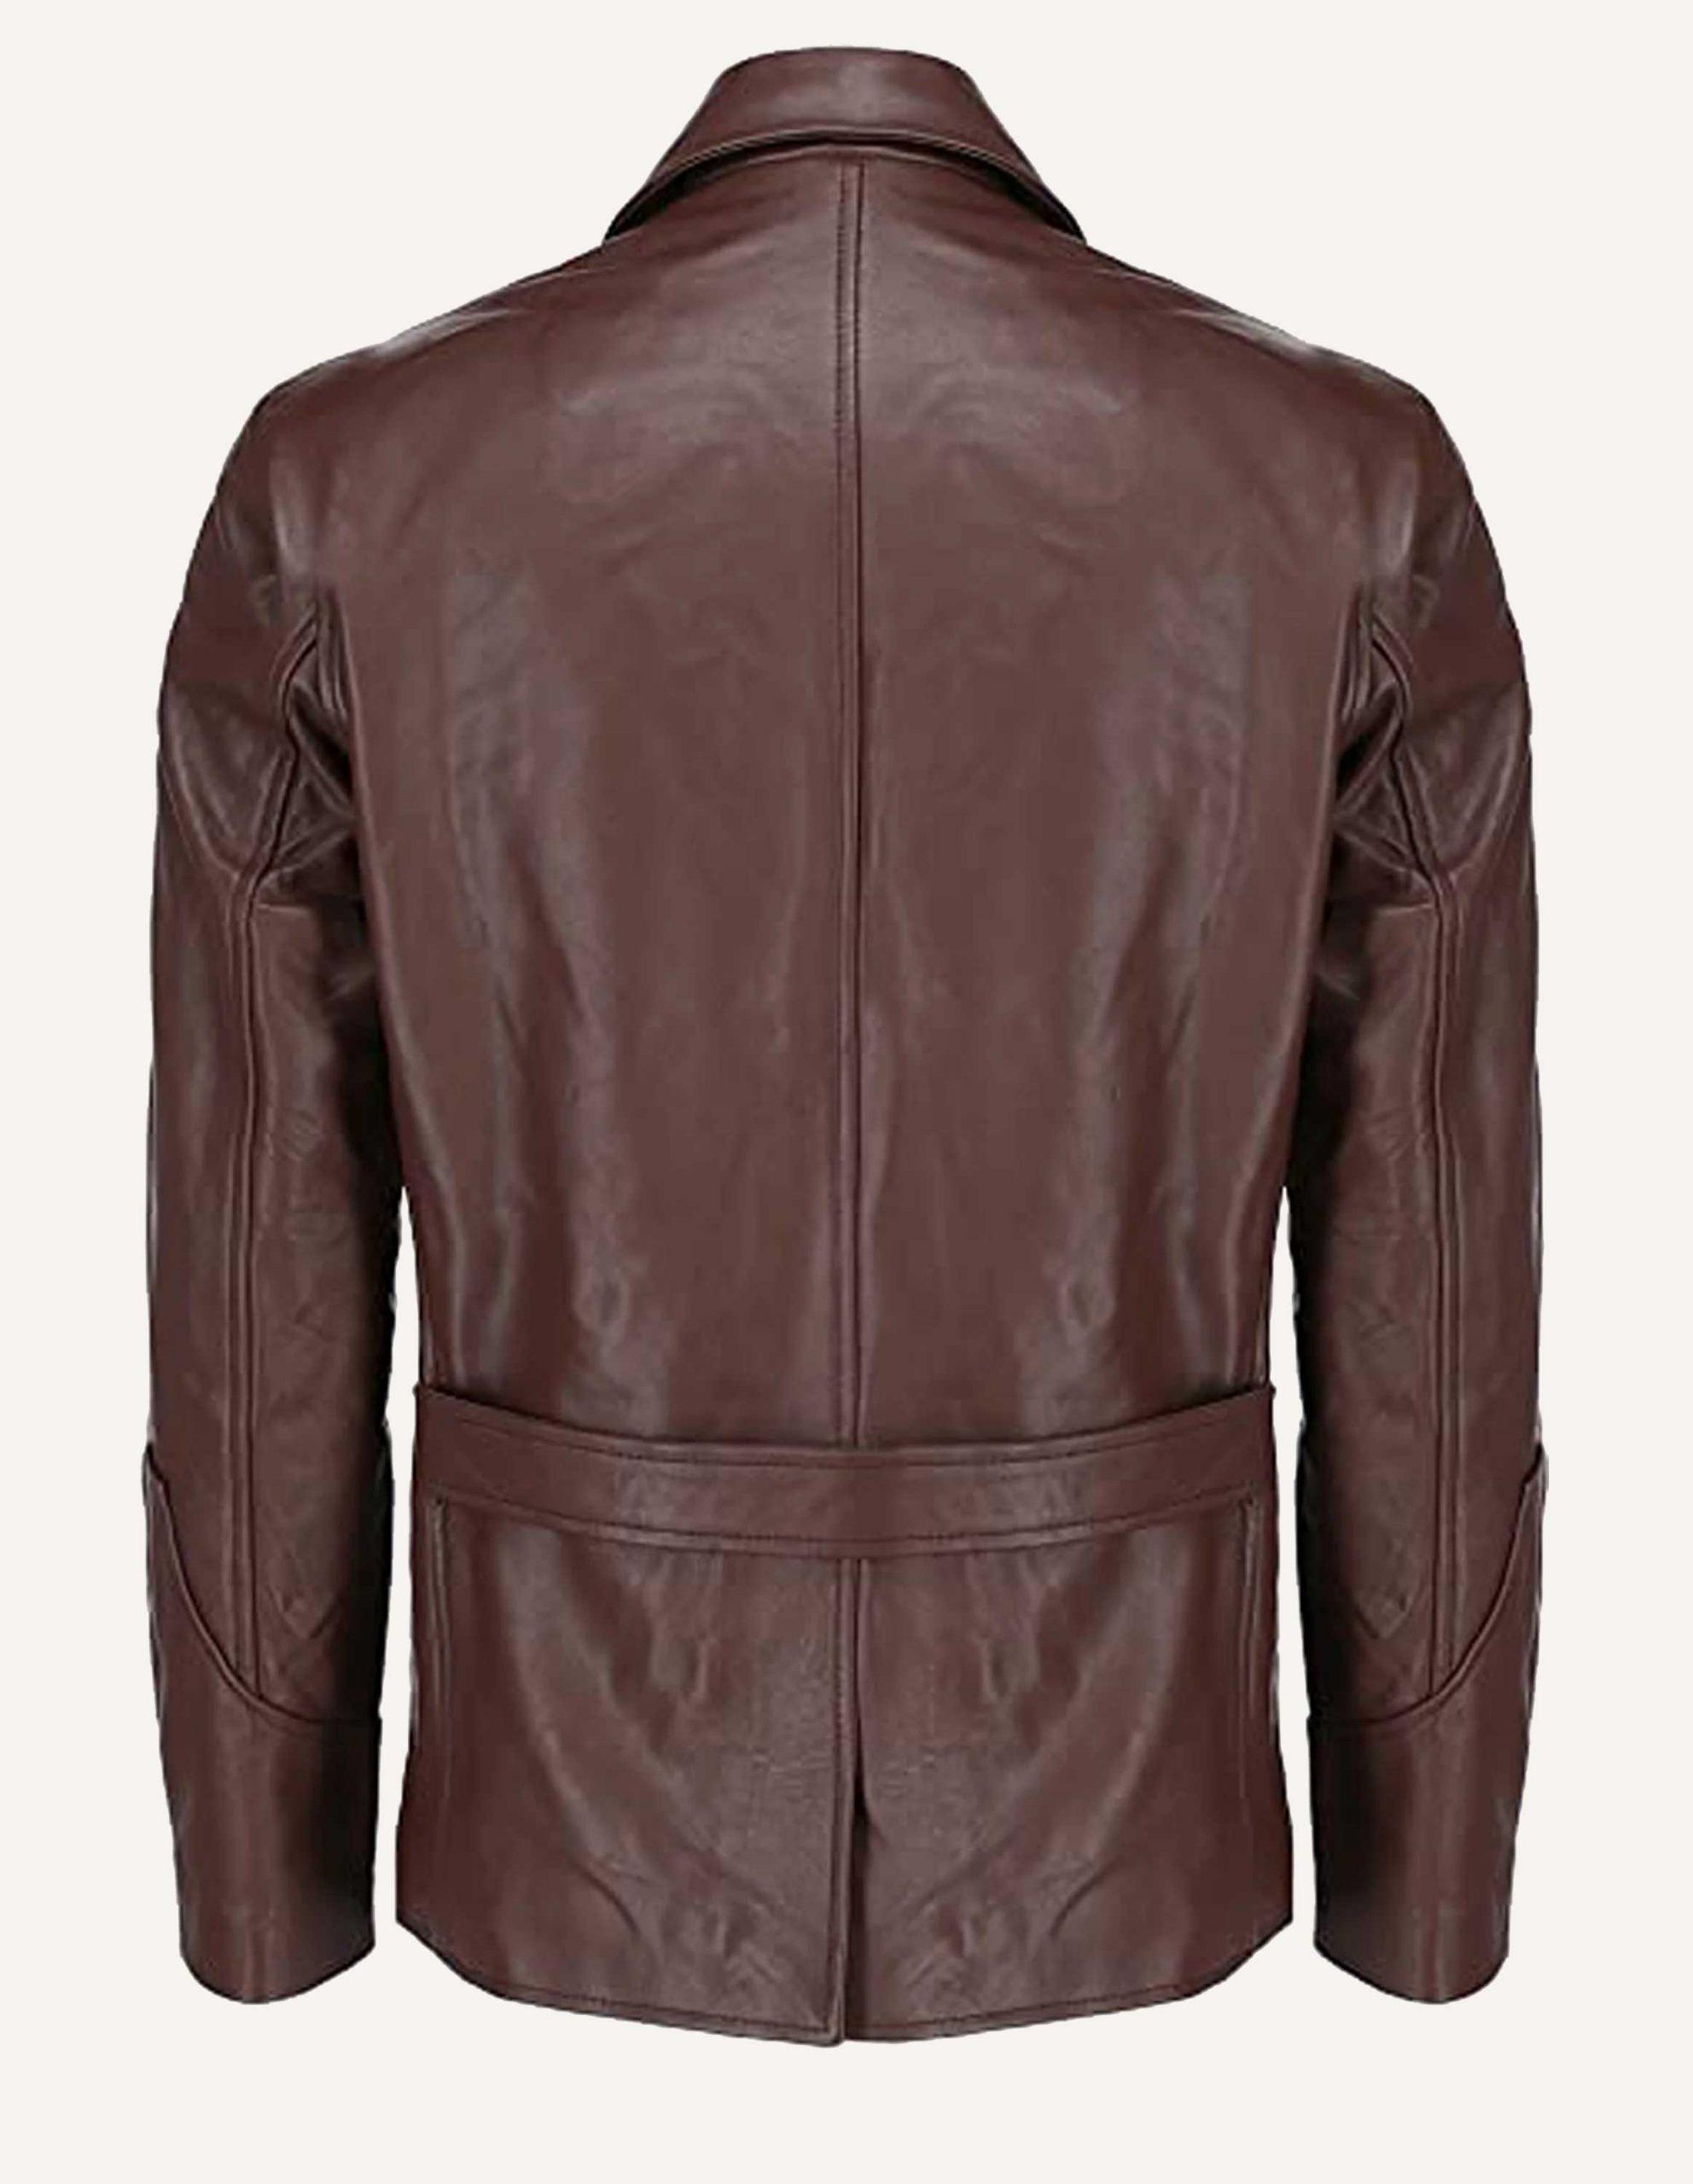 The Secrets of Val Verde Leather Jacket - A2 Jackets